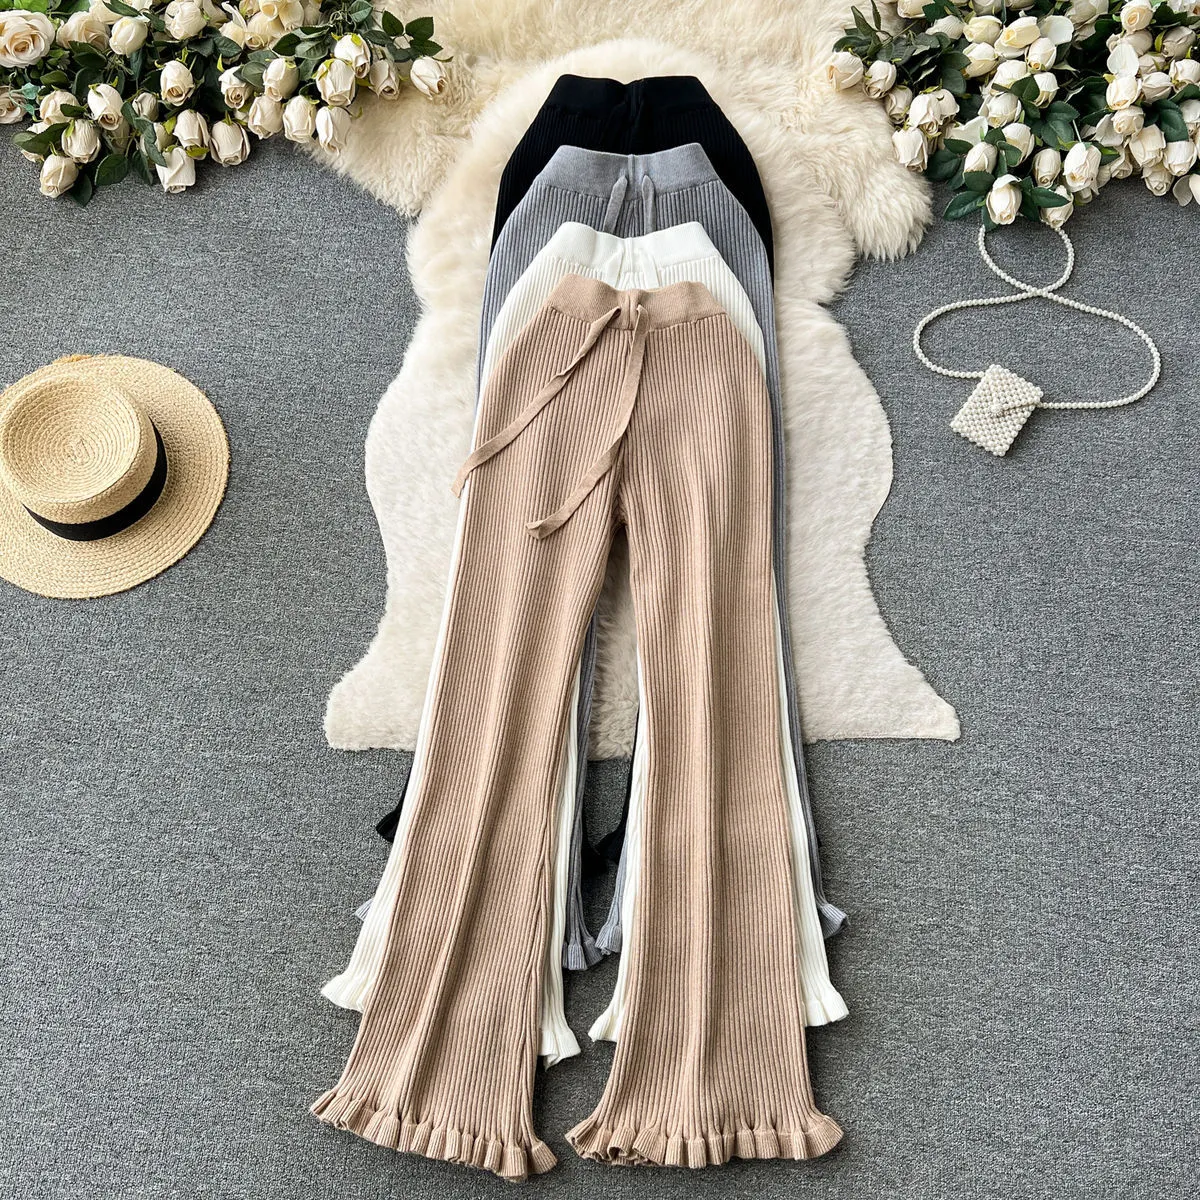 Minimalist and high-end knitted casual pants for women in autumn, high waisted and slim with tassel design, straight and draped floor mop pants